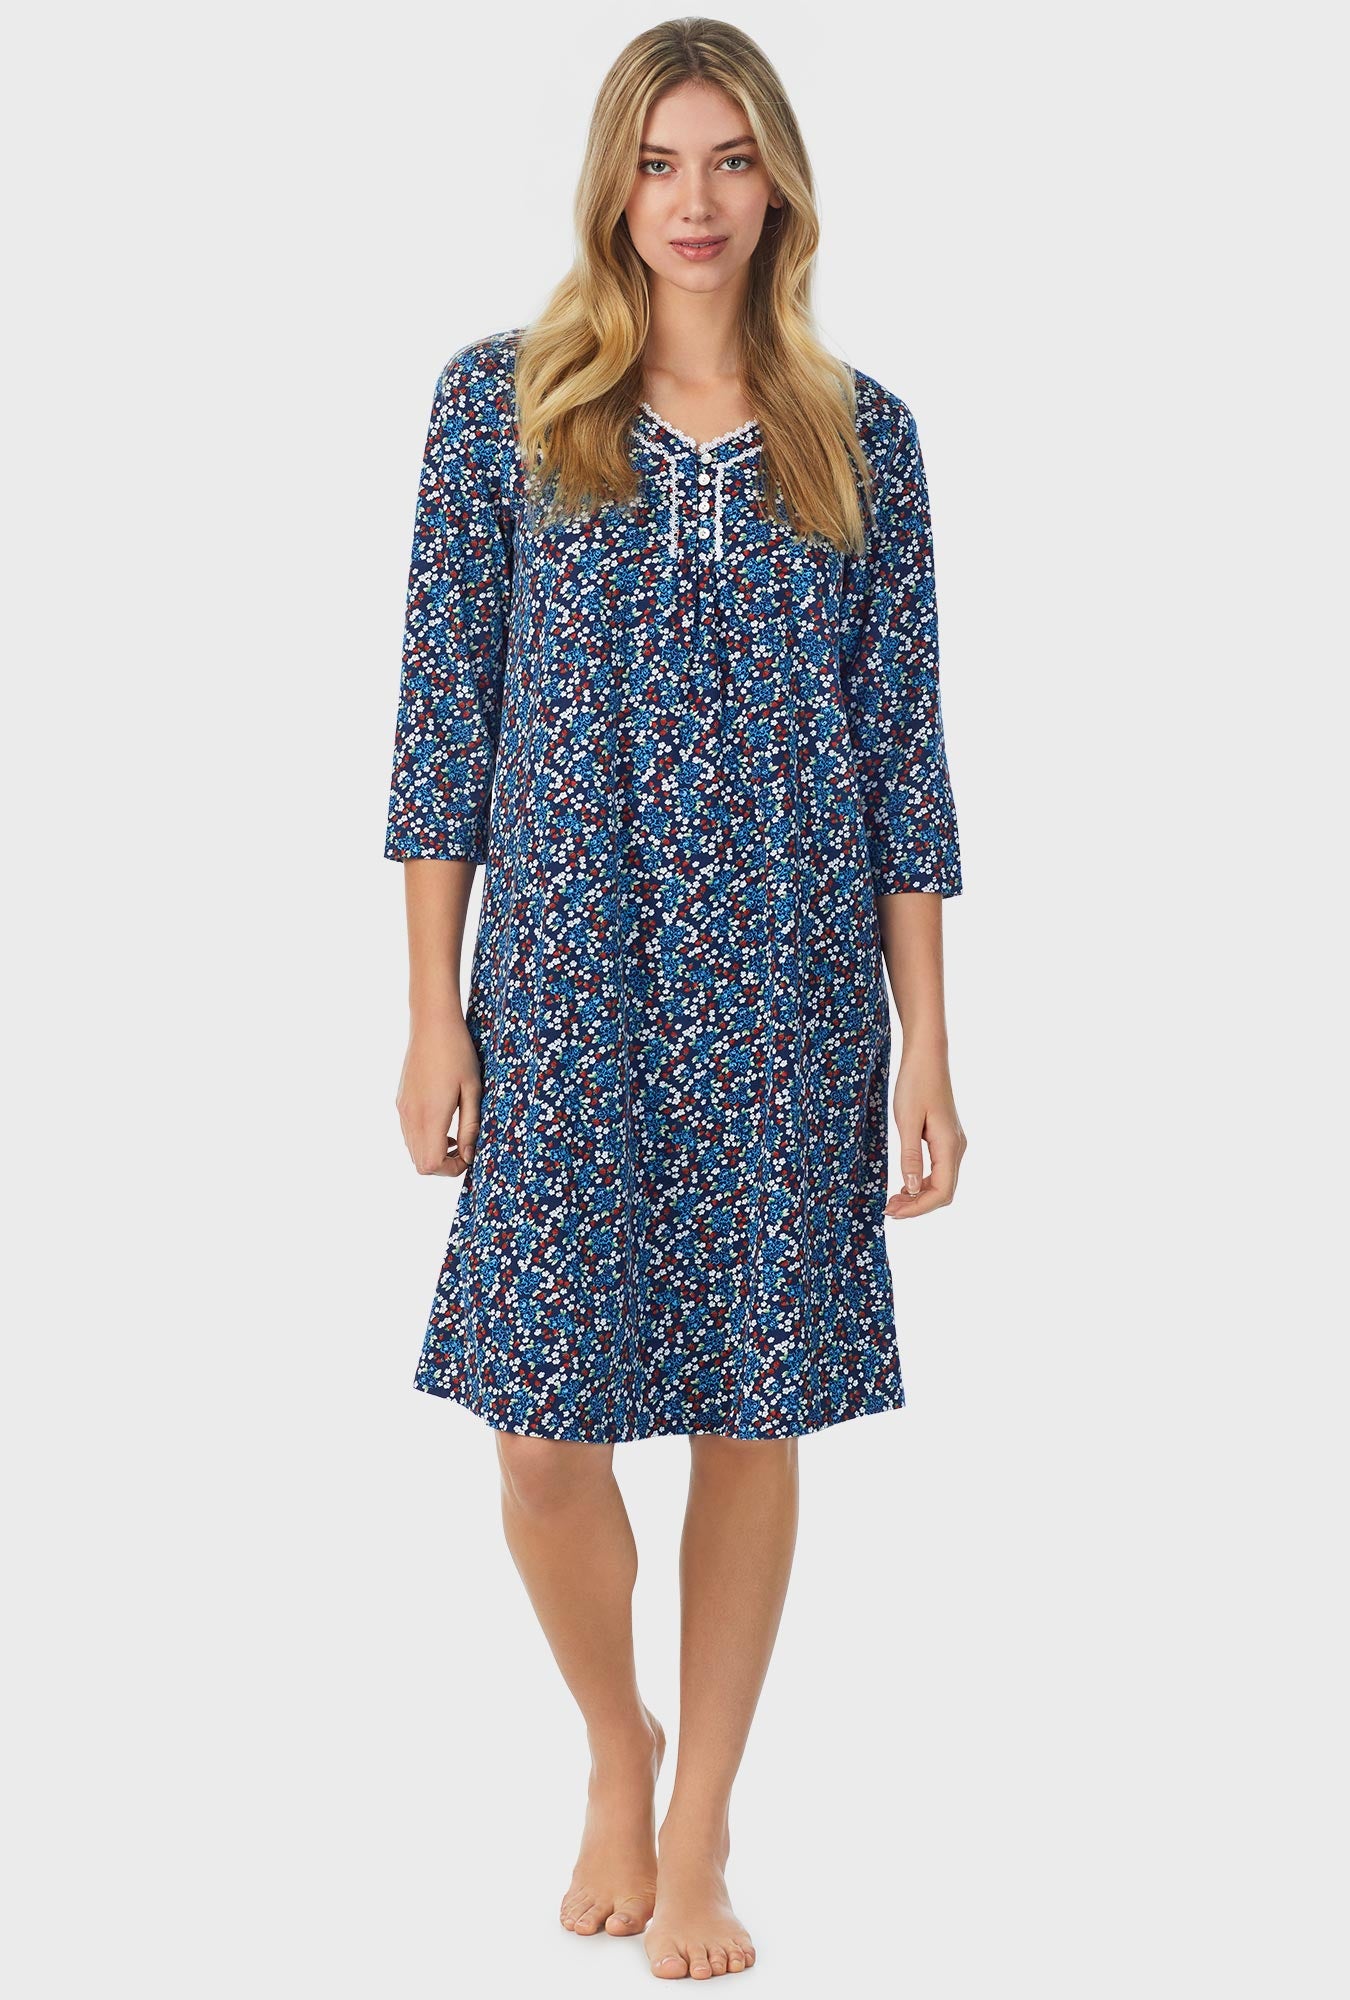 A lady wearing blue quarter sleeve waltz nightgown with moonlight print.